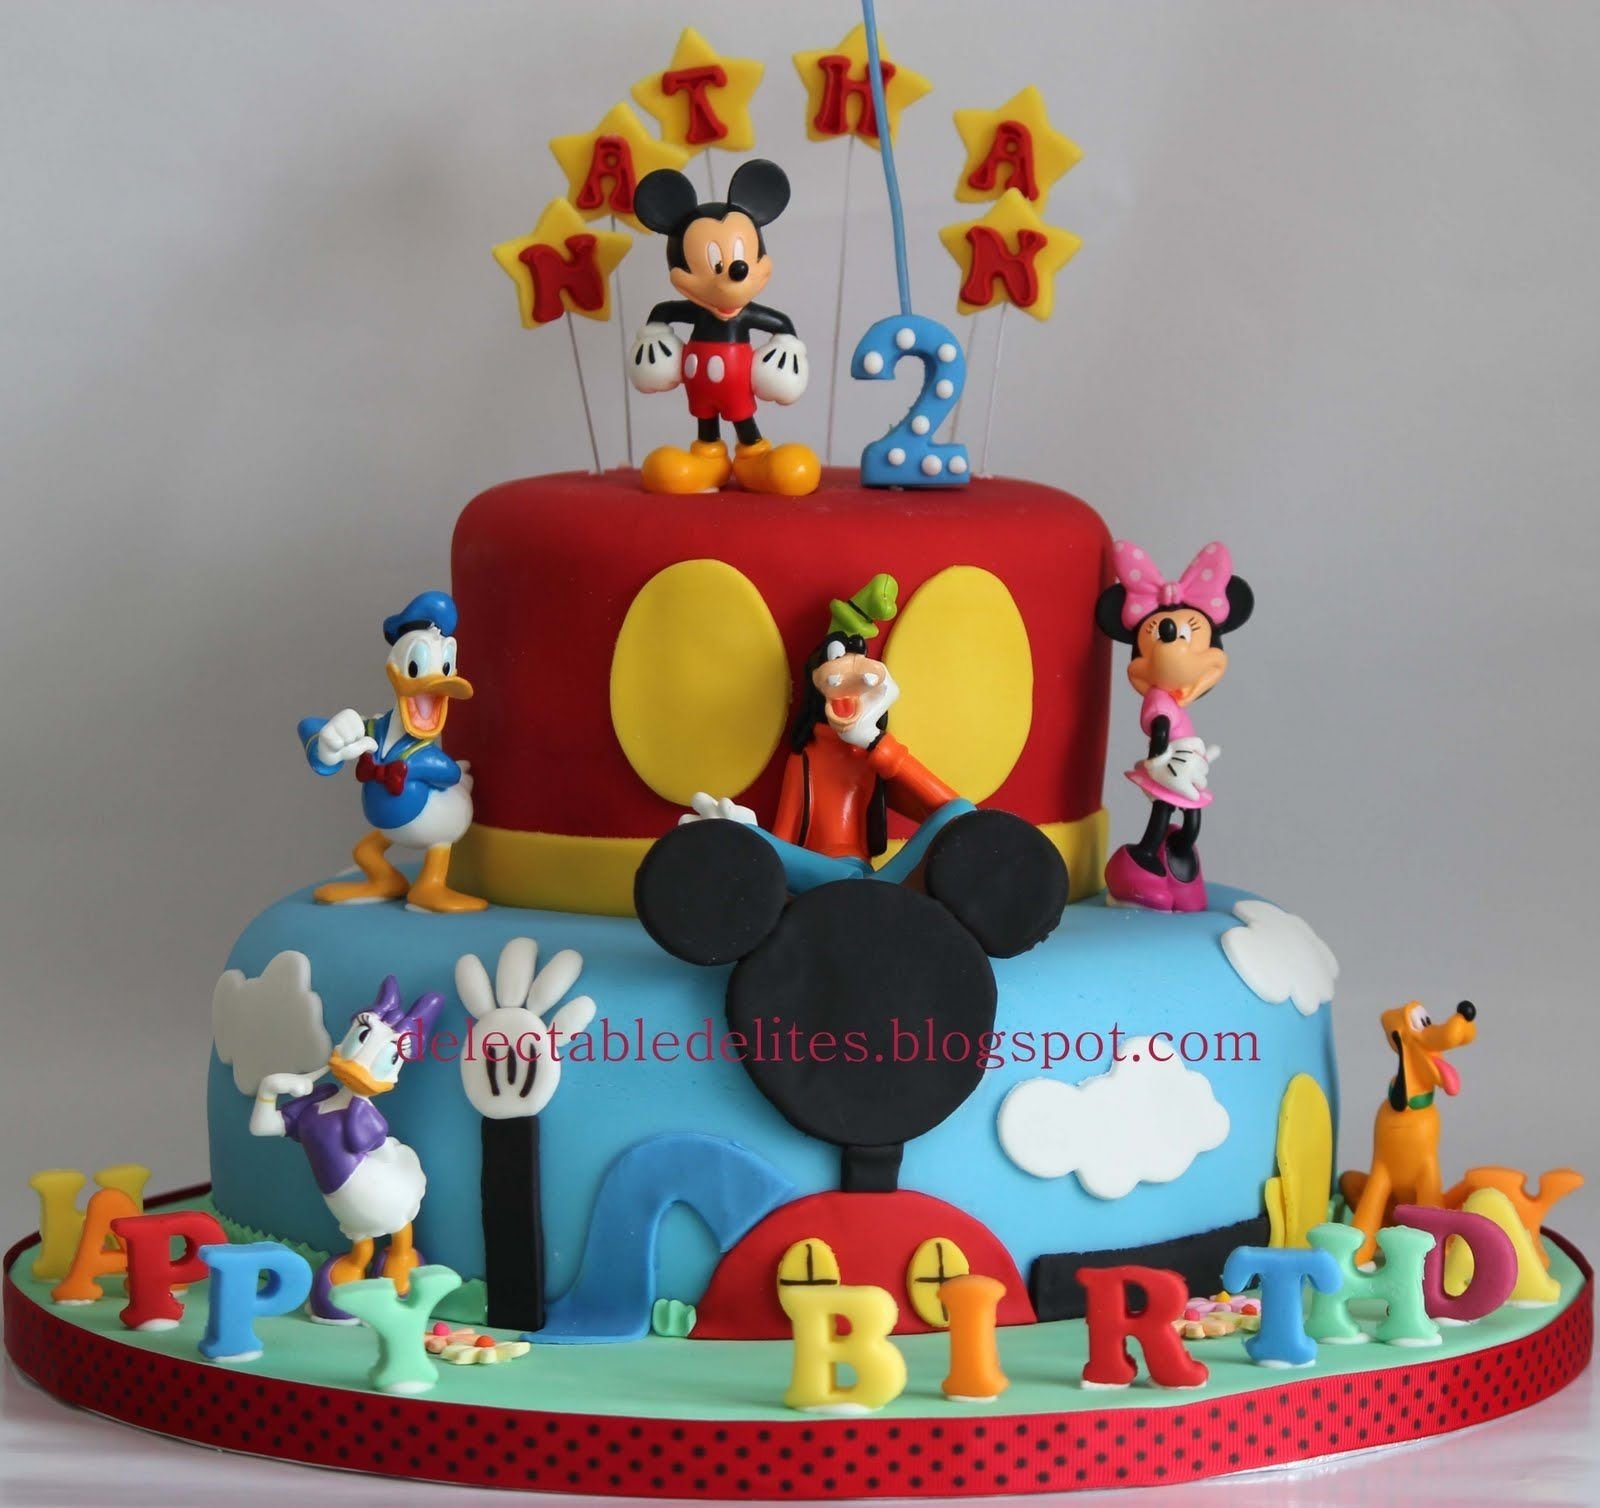 10 Ideal Mickey Mouse Clubhouse Cakes Ideas the cake ill be attempting to make for aidans birthday party 2022